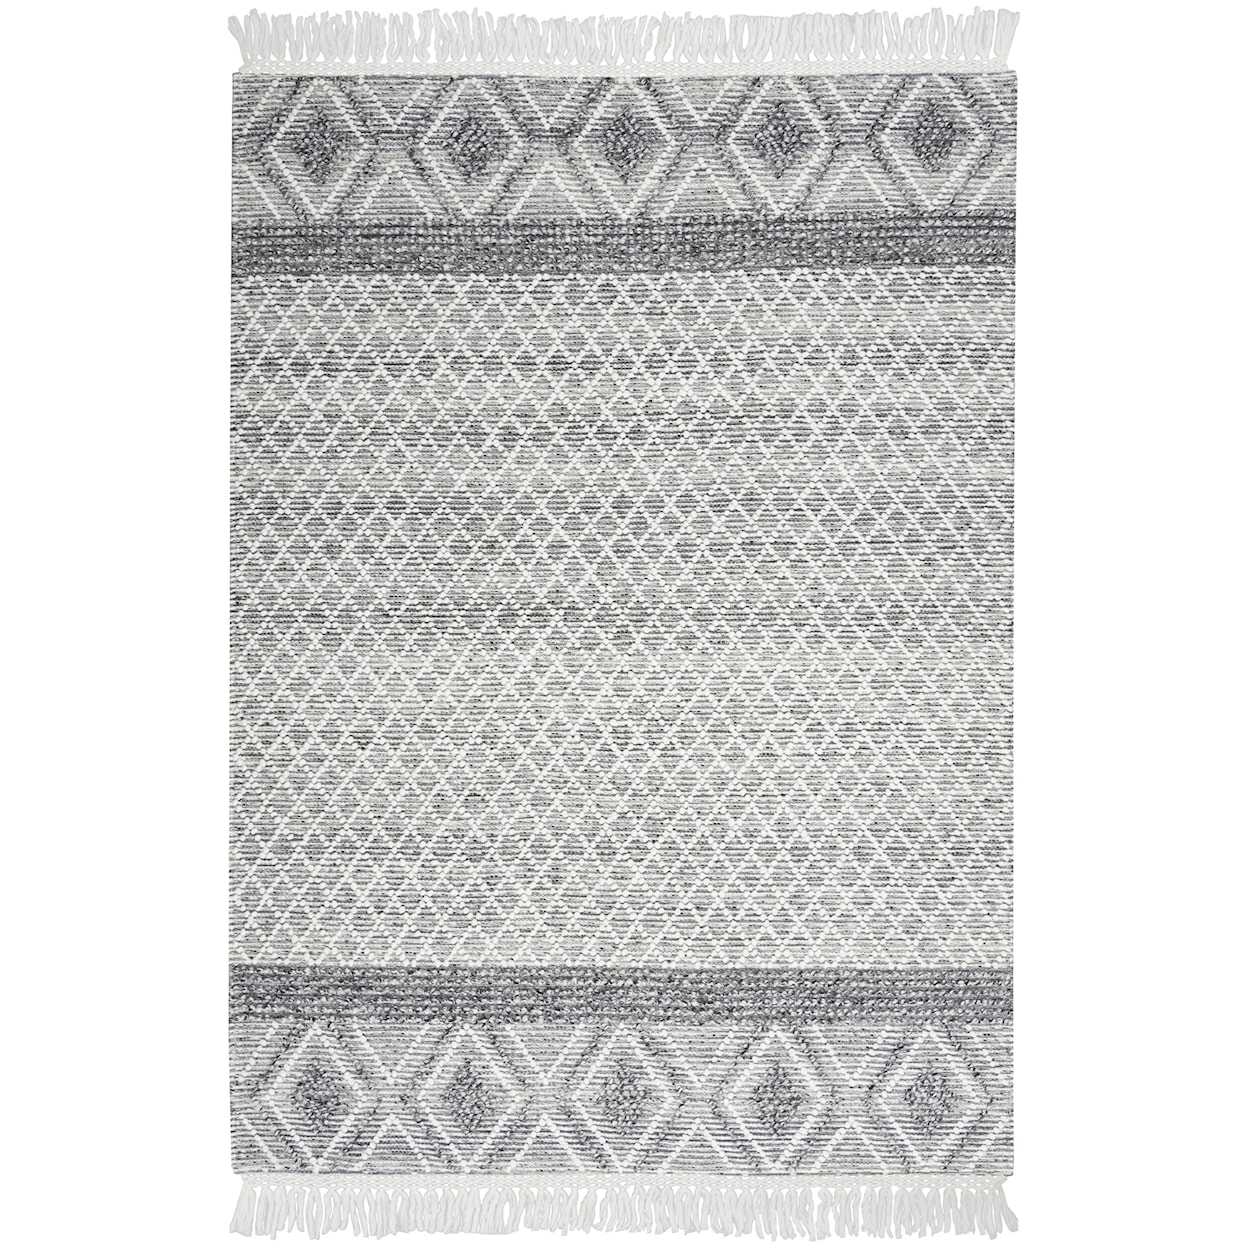 57 Grand By Nicole Curtis Series 3 5'3" x 7'6"  Rug